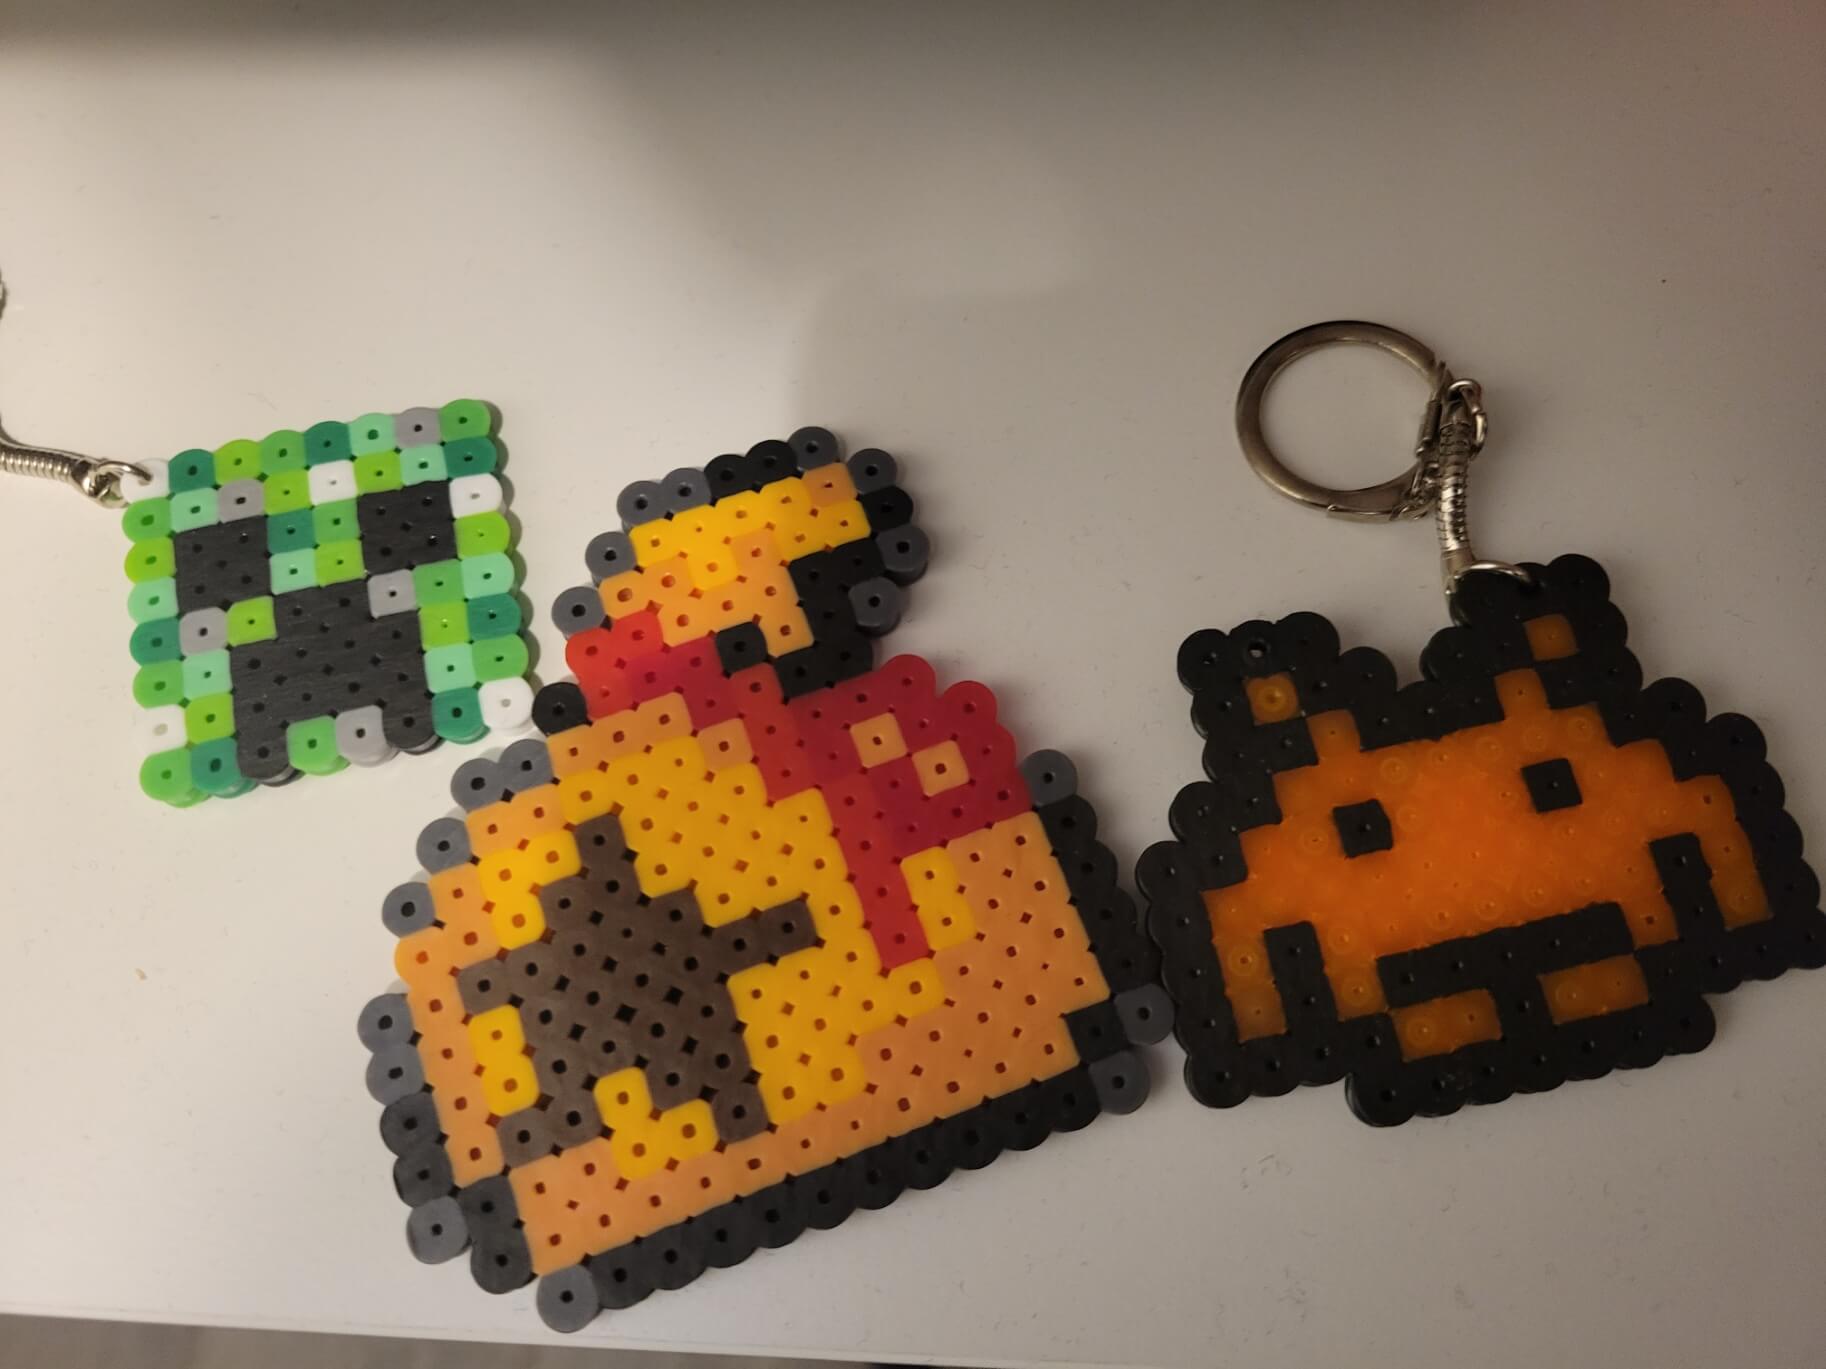 Creeper face (with keychain), Bell Bag from Animal Crossing, Space Invader (Orange, with keychain)